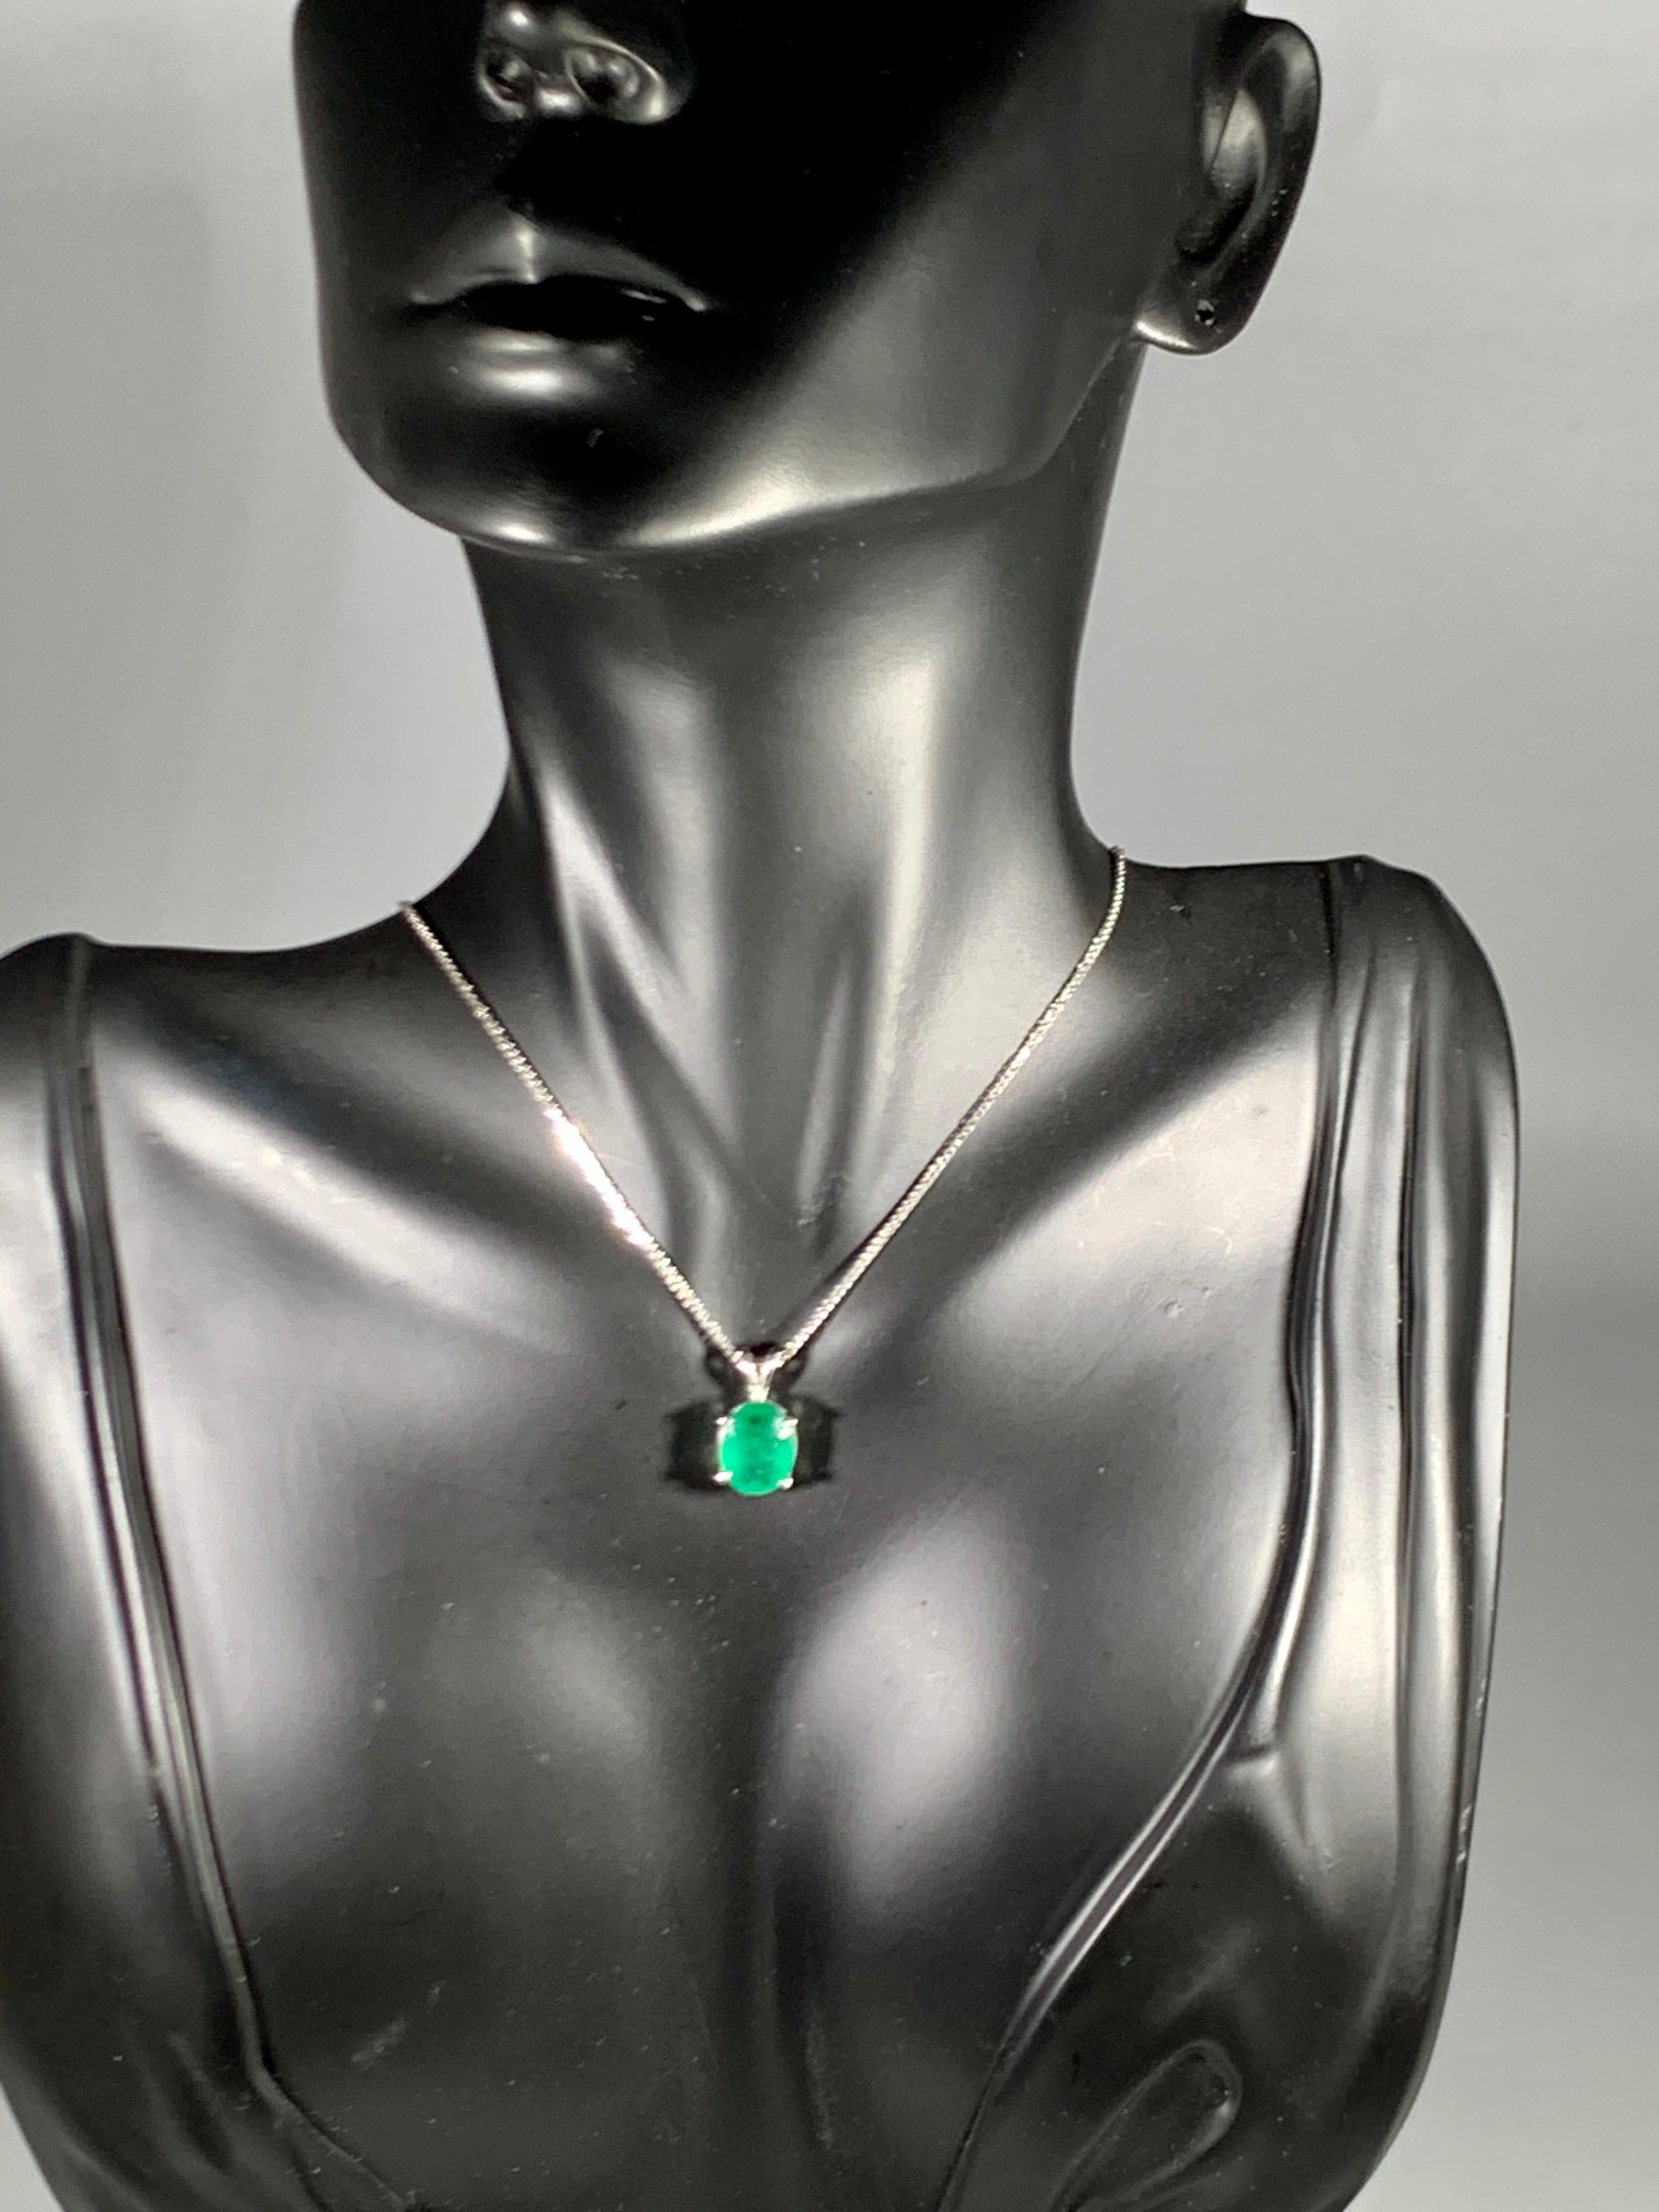 2.5 Carat Oval Shape Emerald Pendant or Necklace 14 Karat White Gold with Chain 2